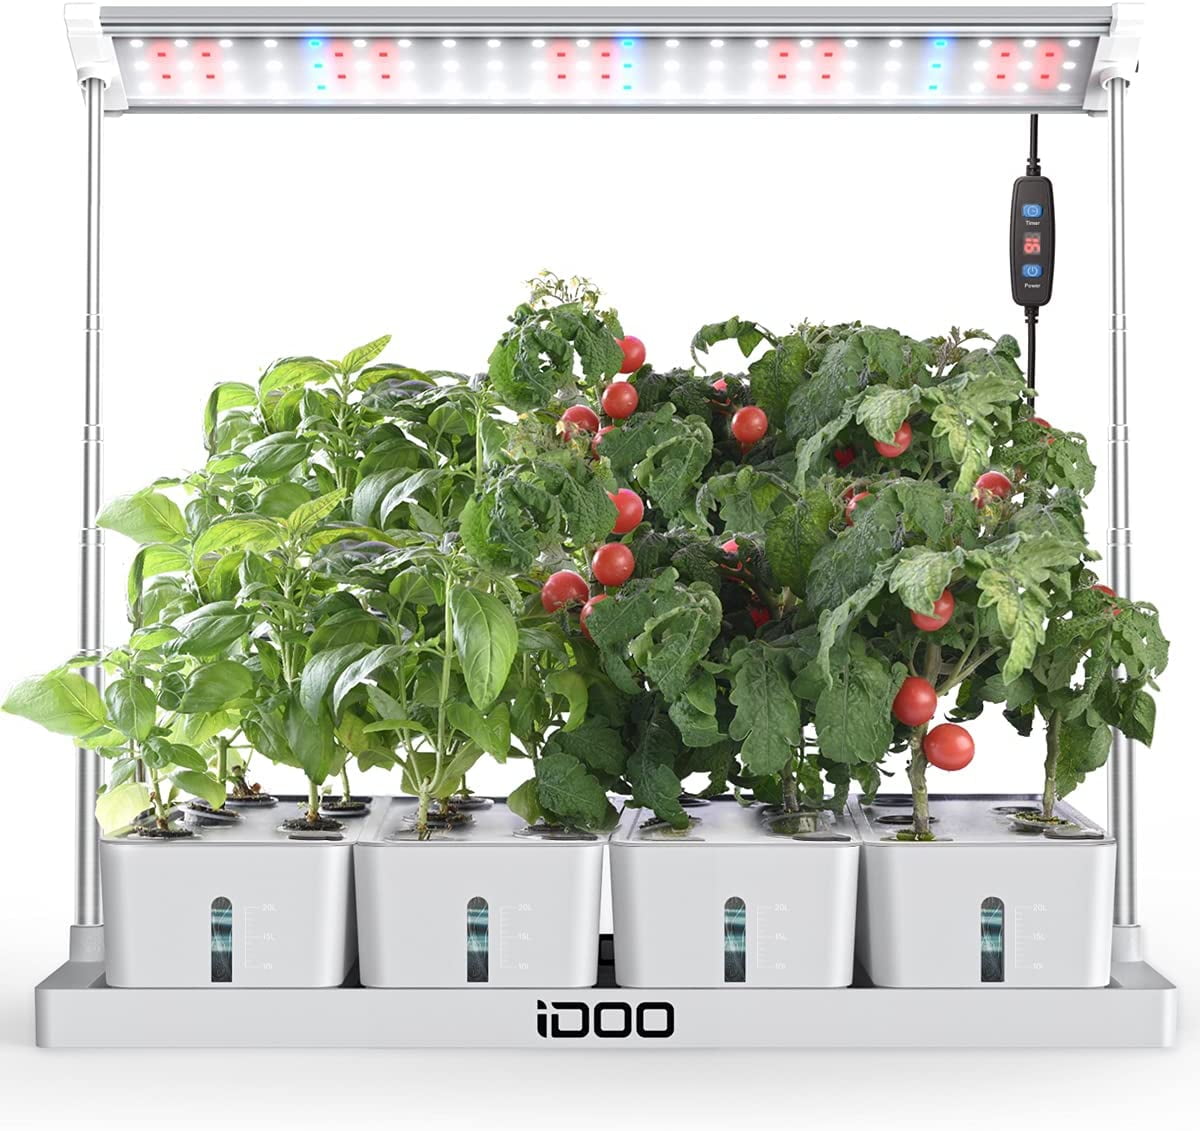 iDOO 20 Pods Hydroponics Growing System with LED Grow Light, 27